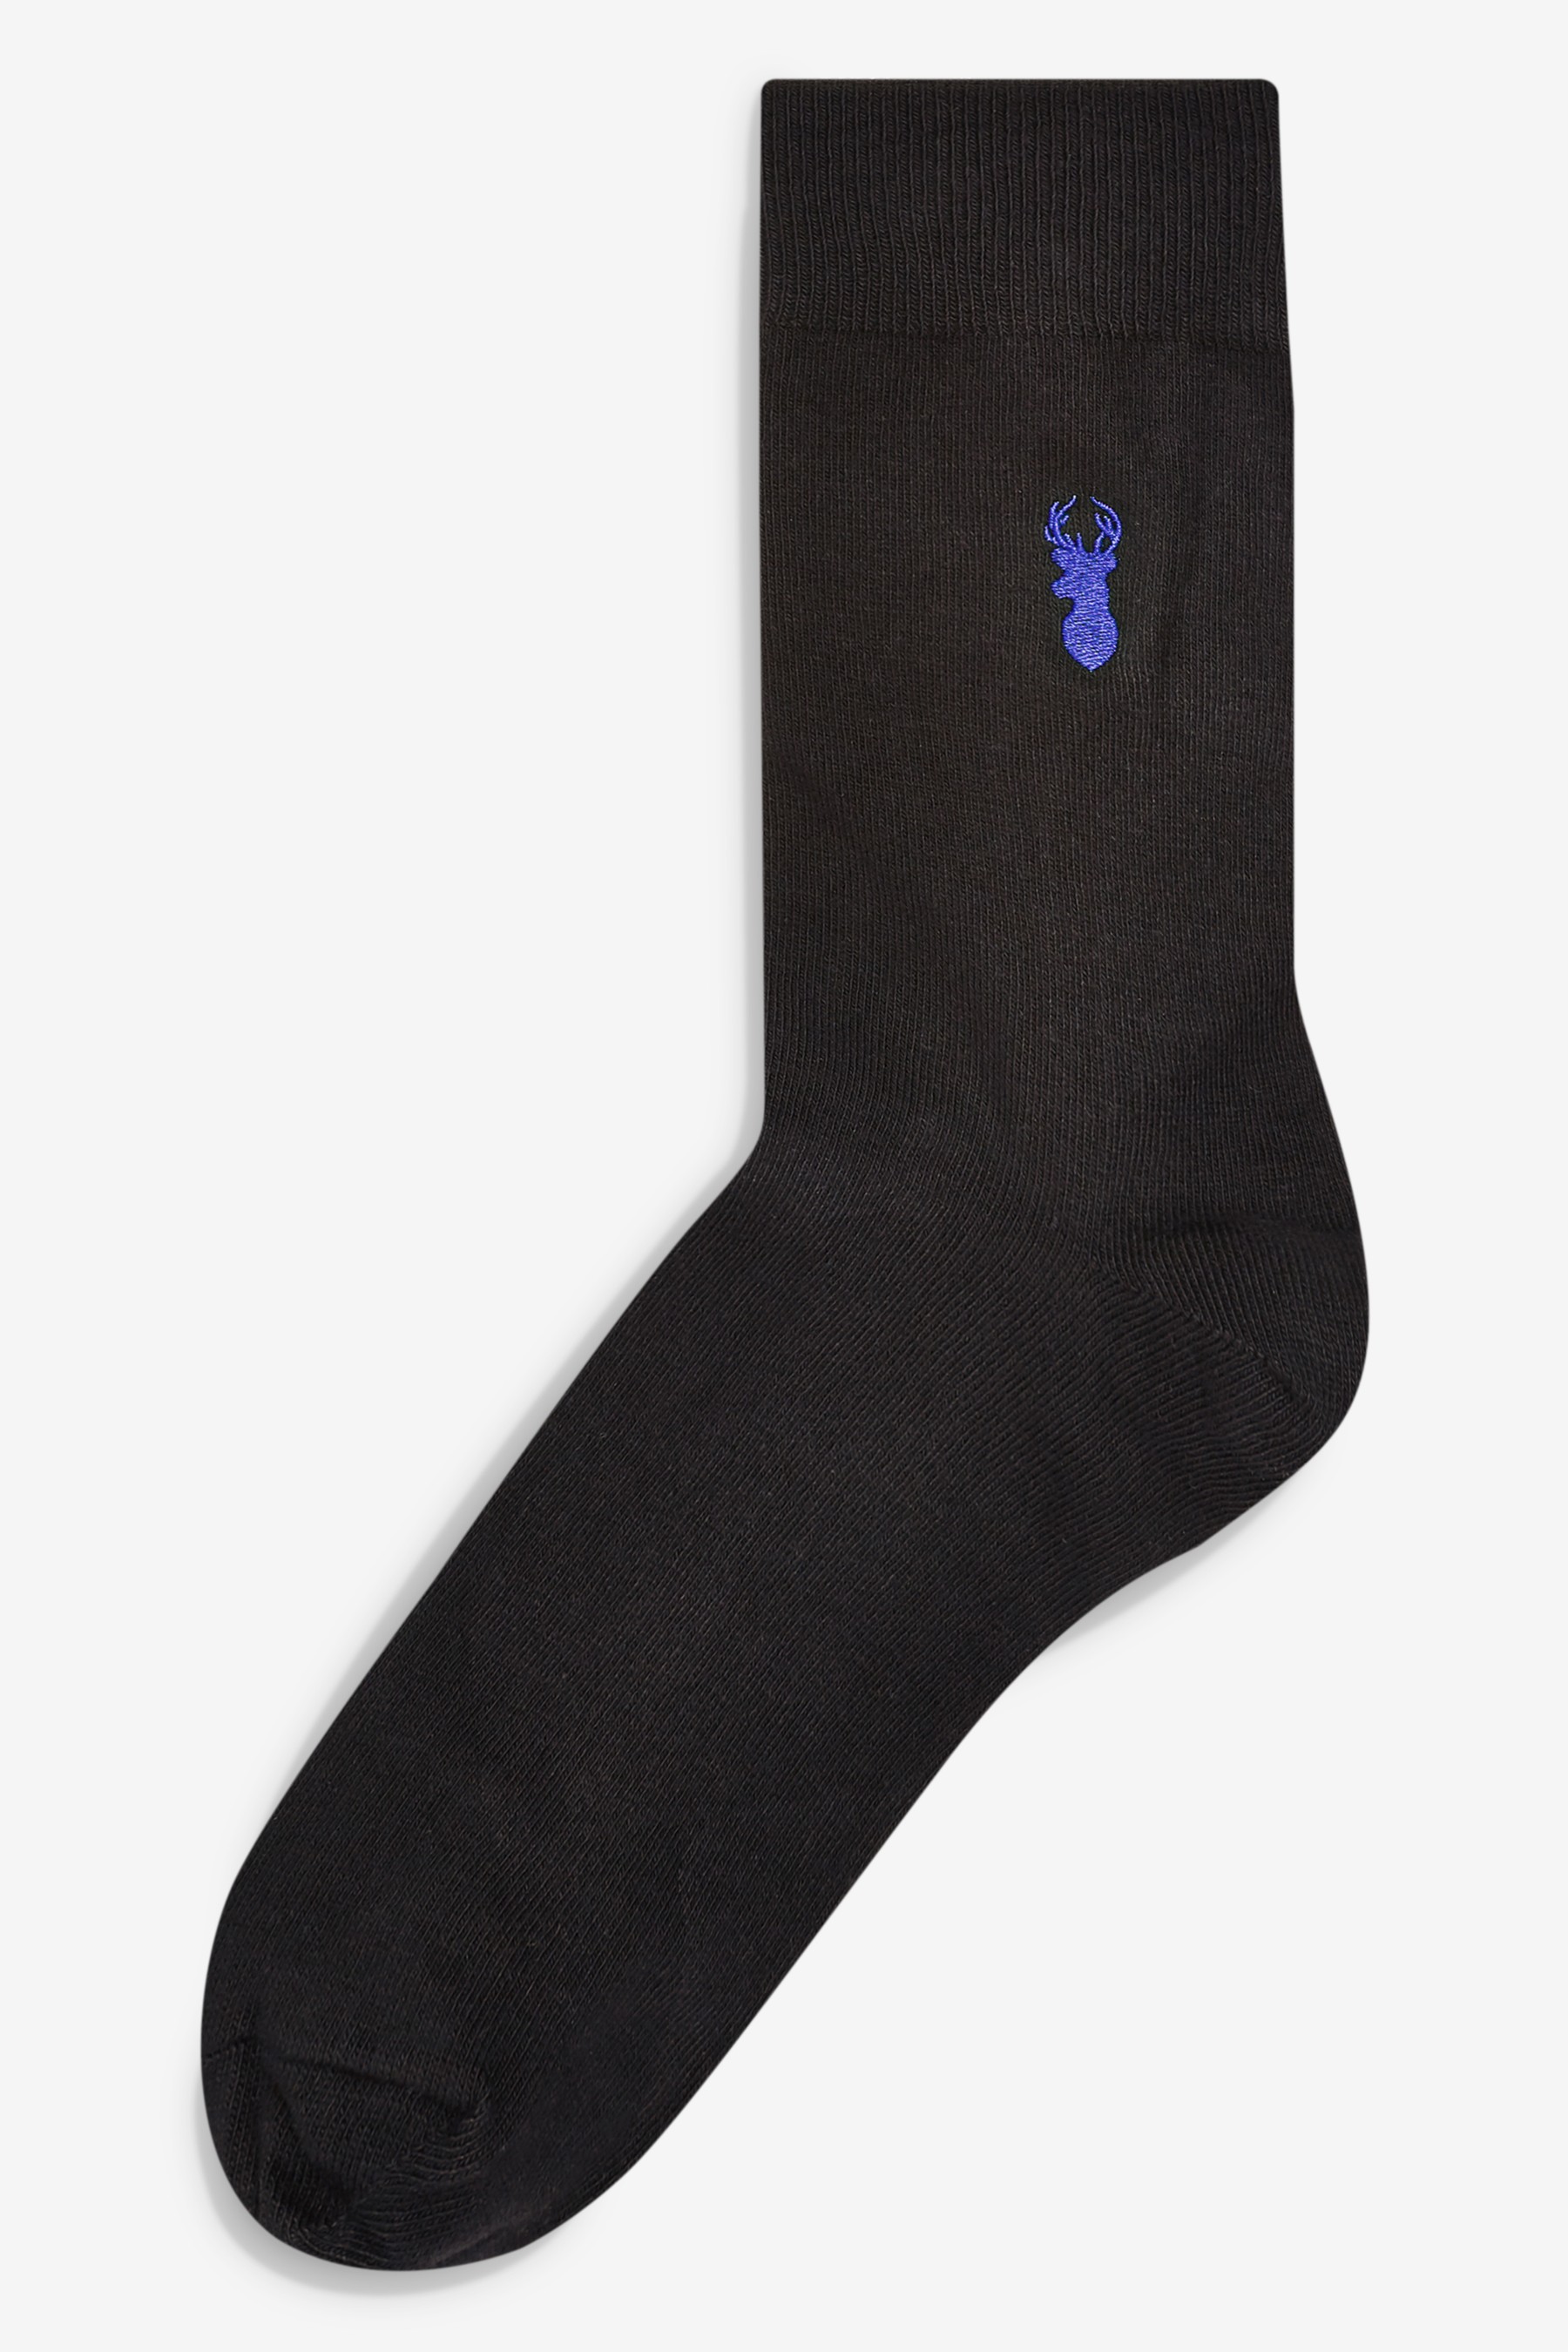 Embroidered Stag Socks 8 Pack